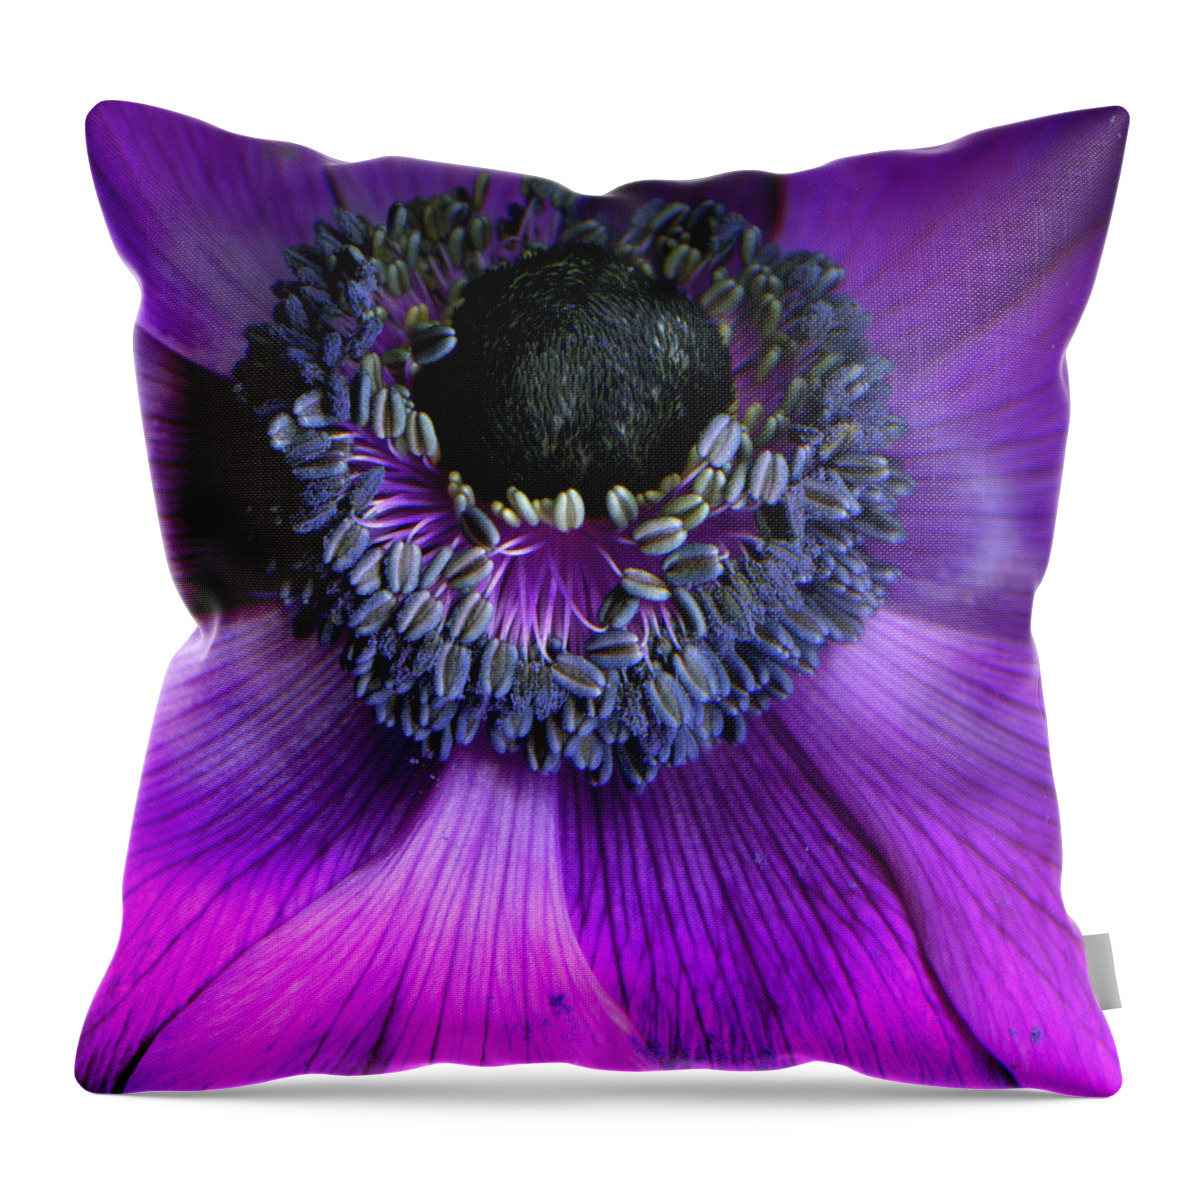 Windflower Throw Pillow featuring the photograph Anemone Coronaria by Photograph By Magda Indigo